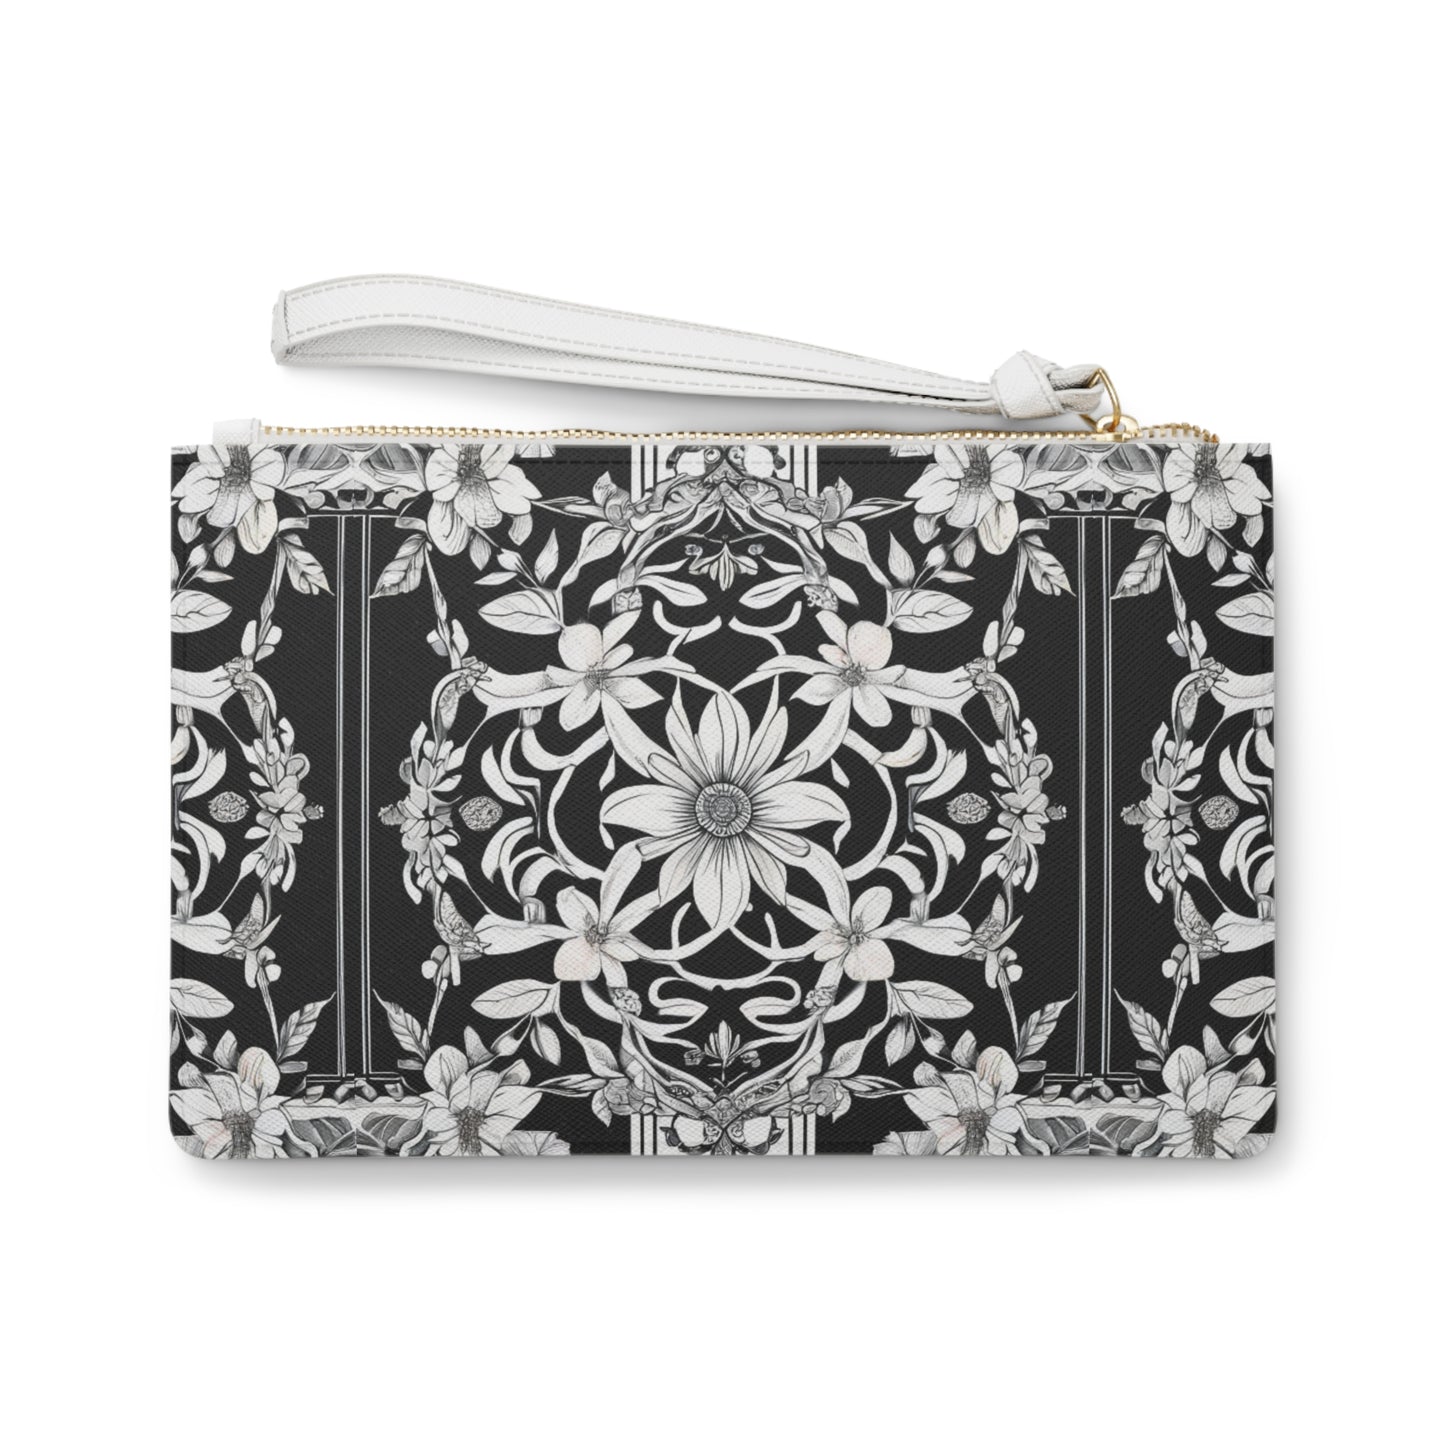 Savoy Row Floral Black and White Neutral Pattern Decorative Evening Errands Pouch Clutch Bag